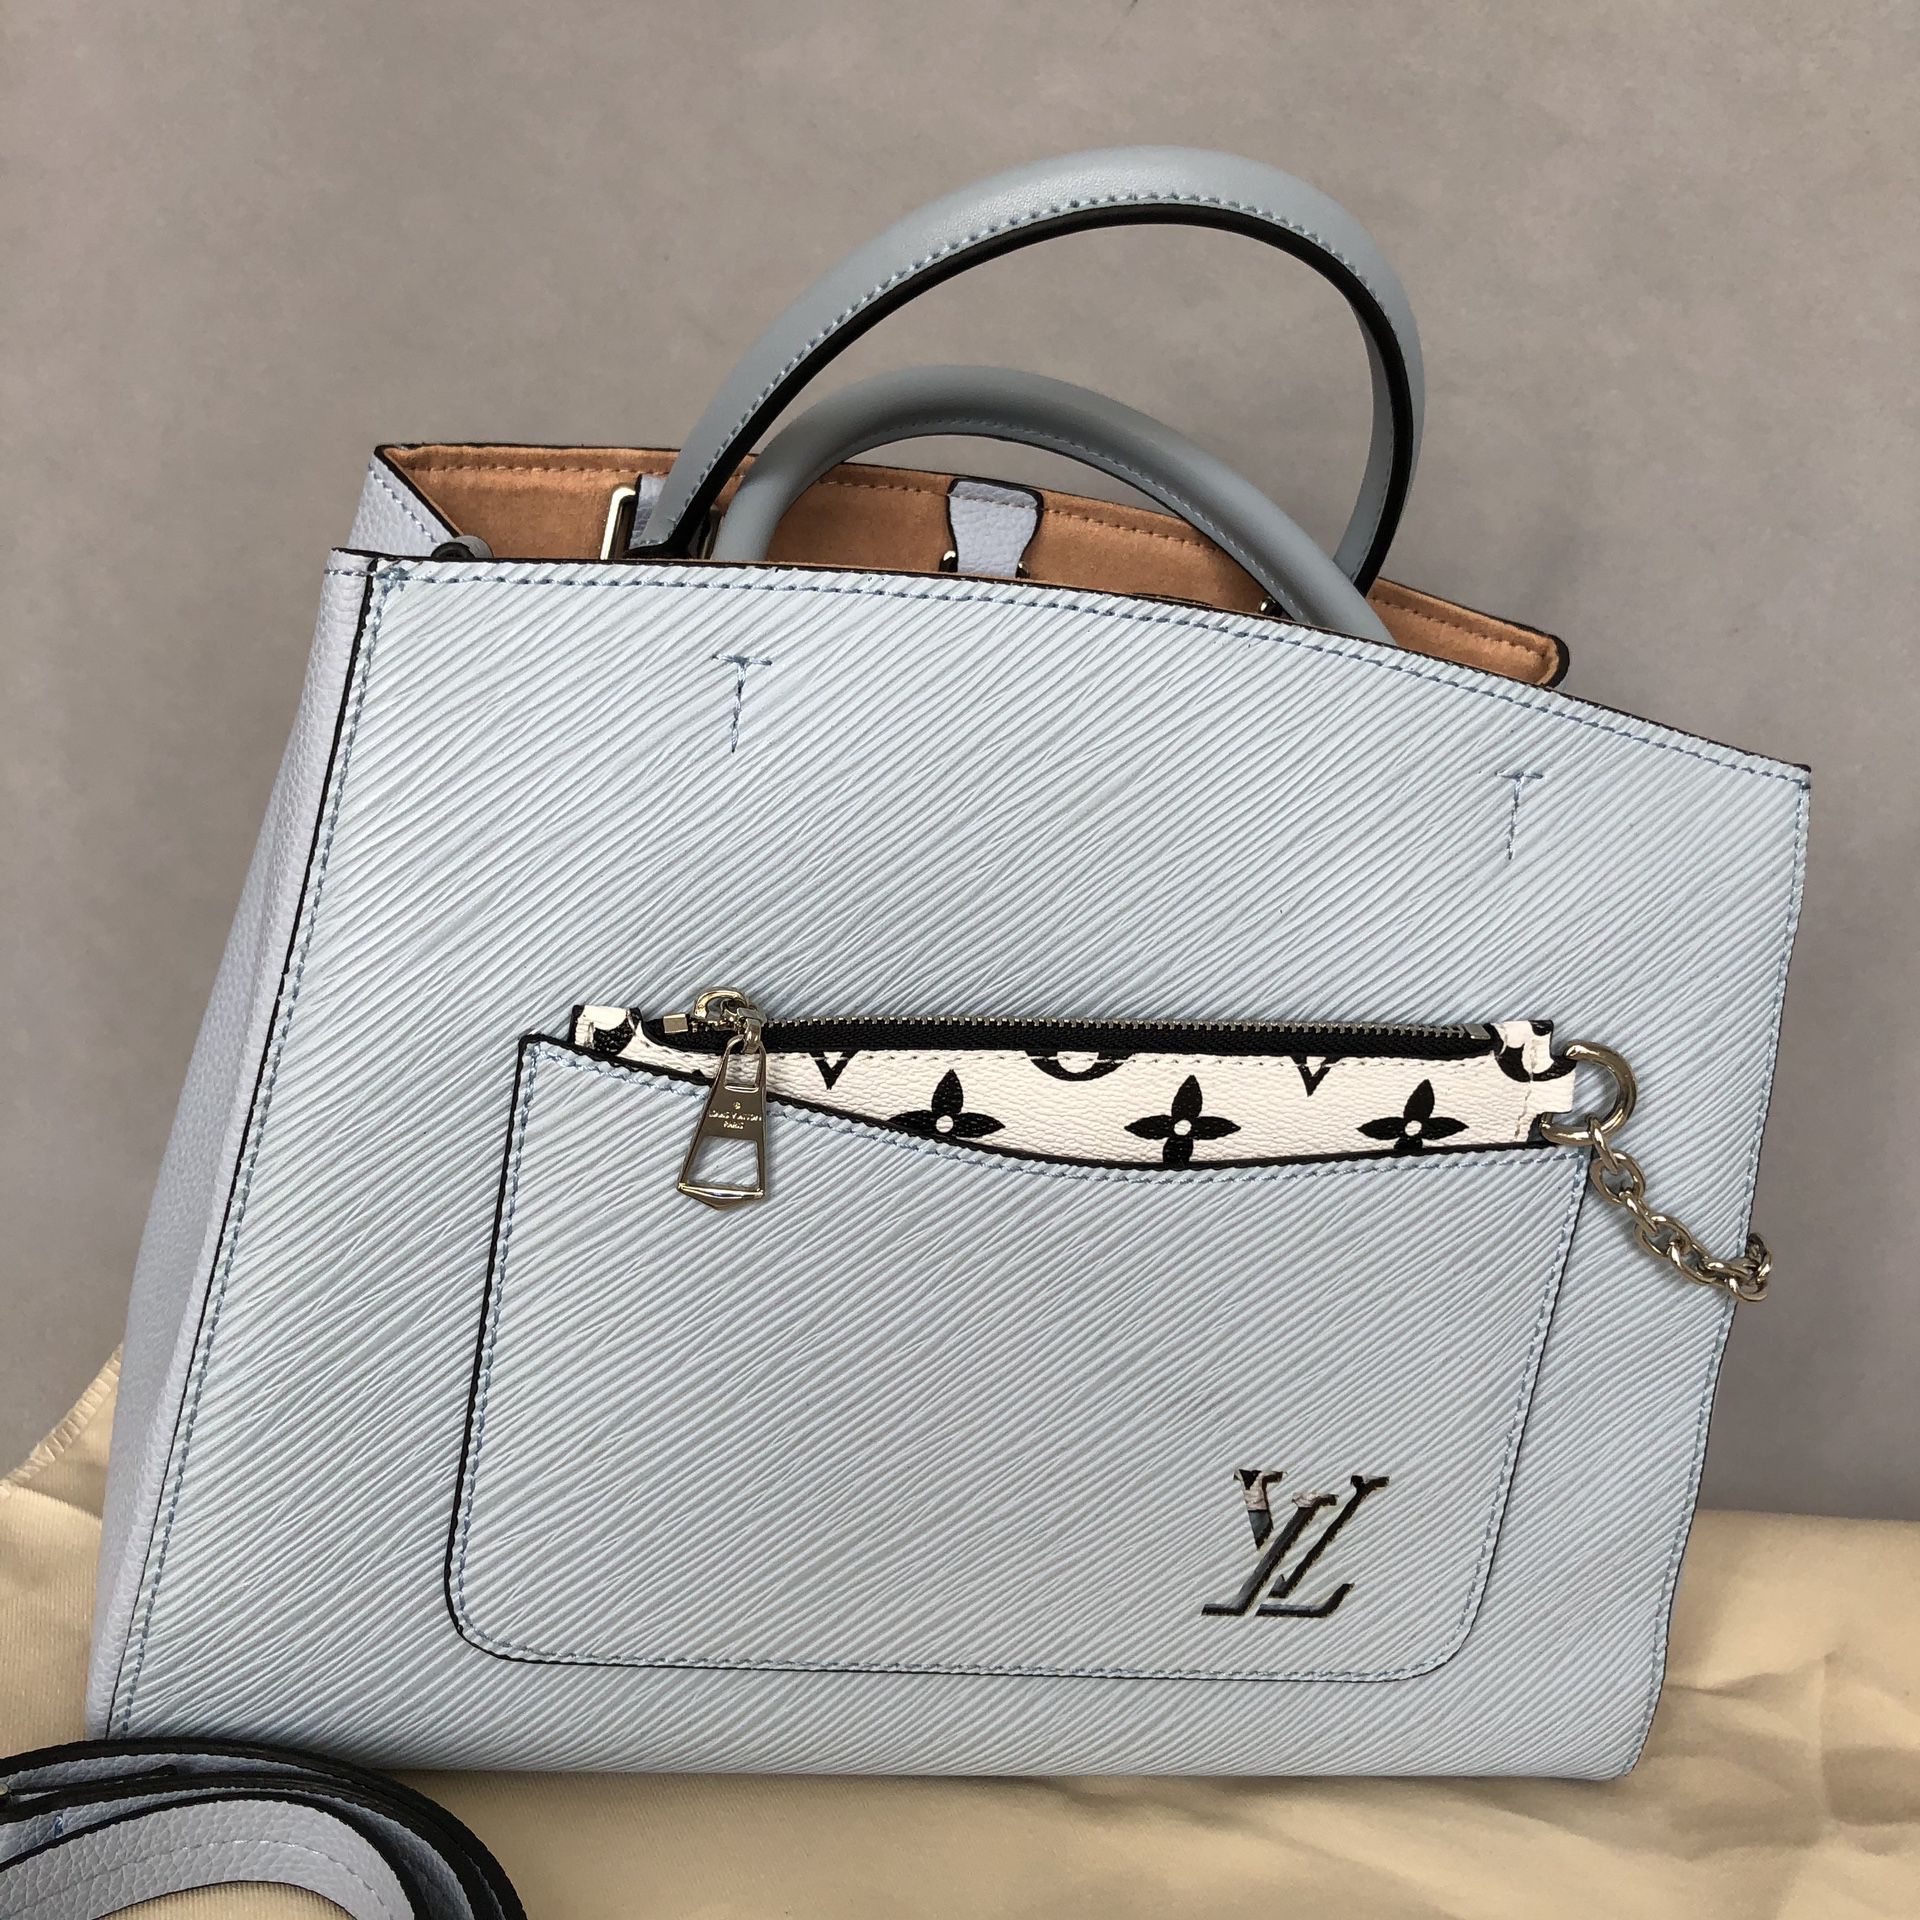 Louis Vuitton Marelle Tote BB Bag LV Epi Monogram Shopping Bag Light Blue  2Way Shoulderbag M59950 with See-through LV logo for Sale in Toledo, OH 